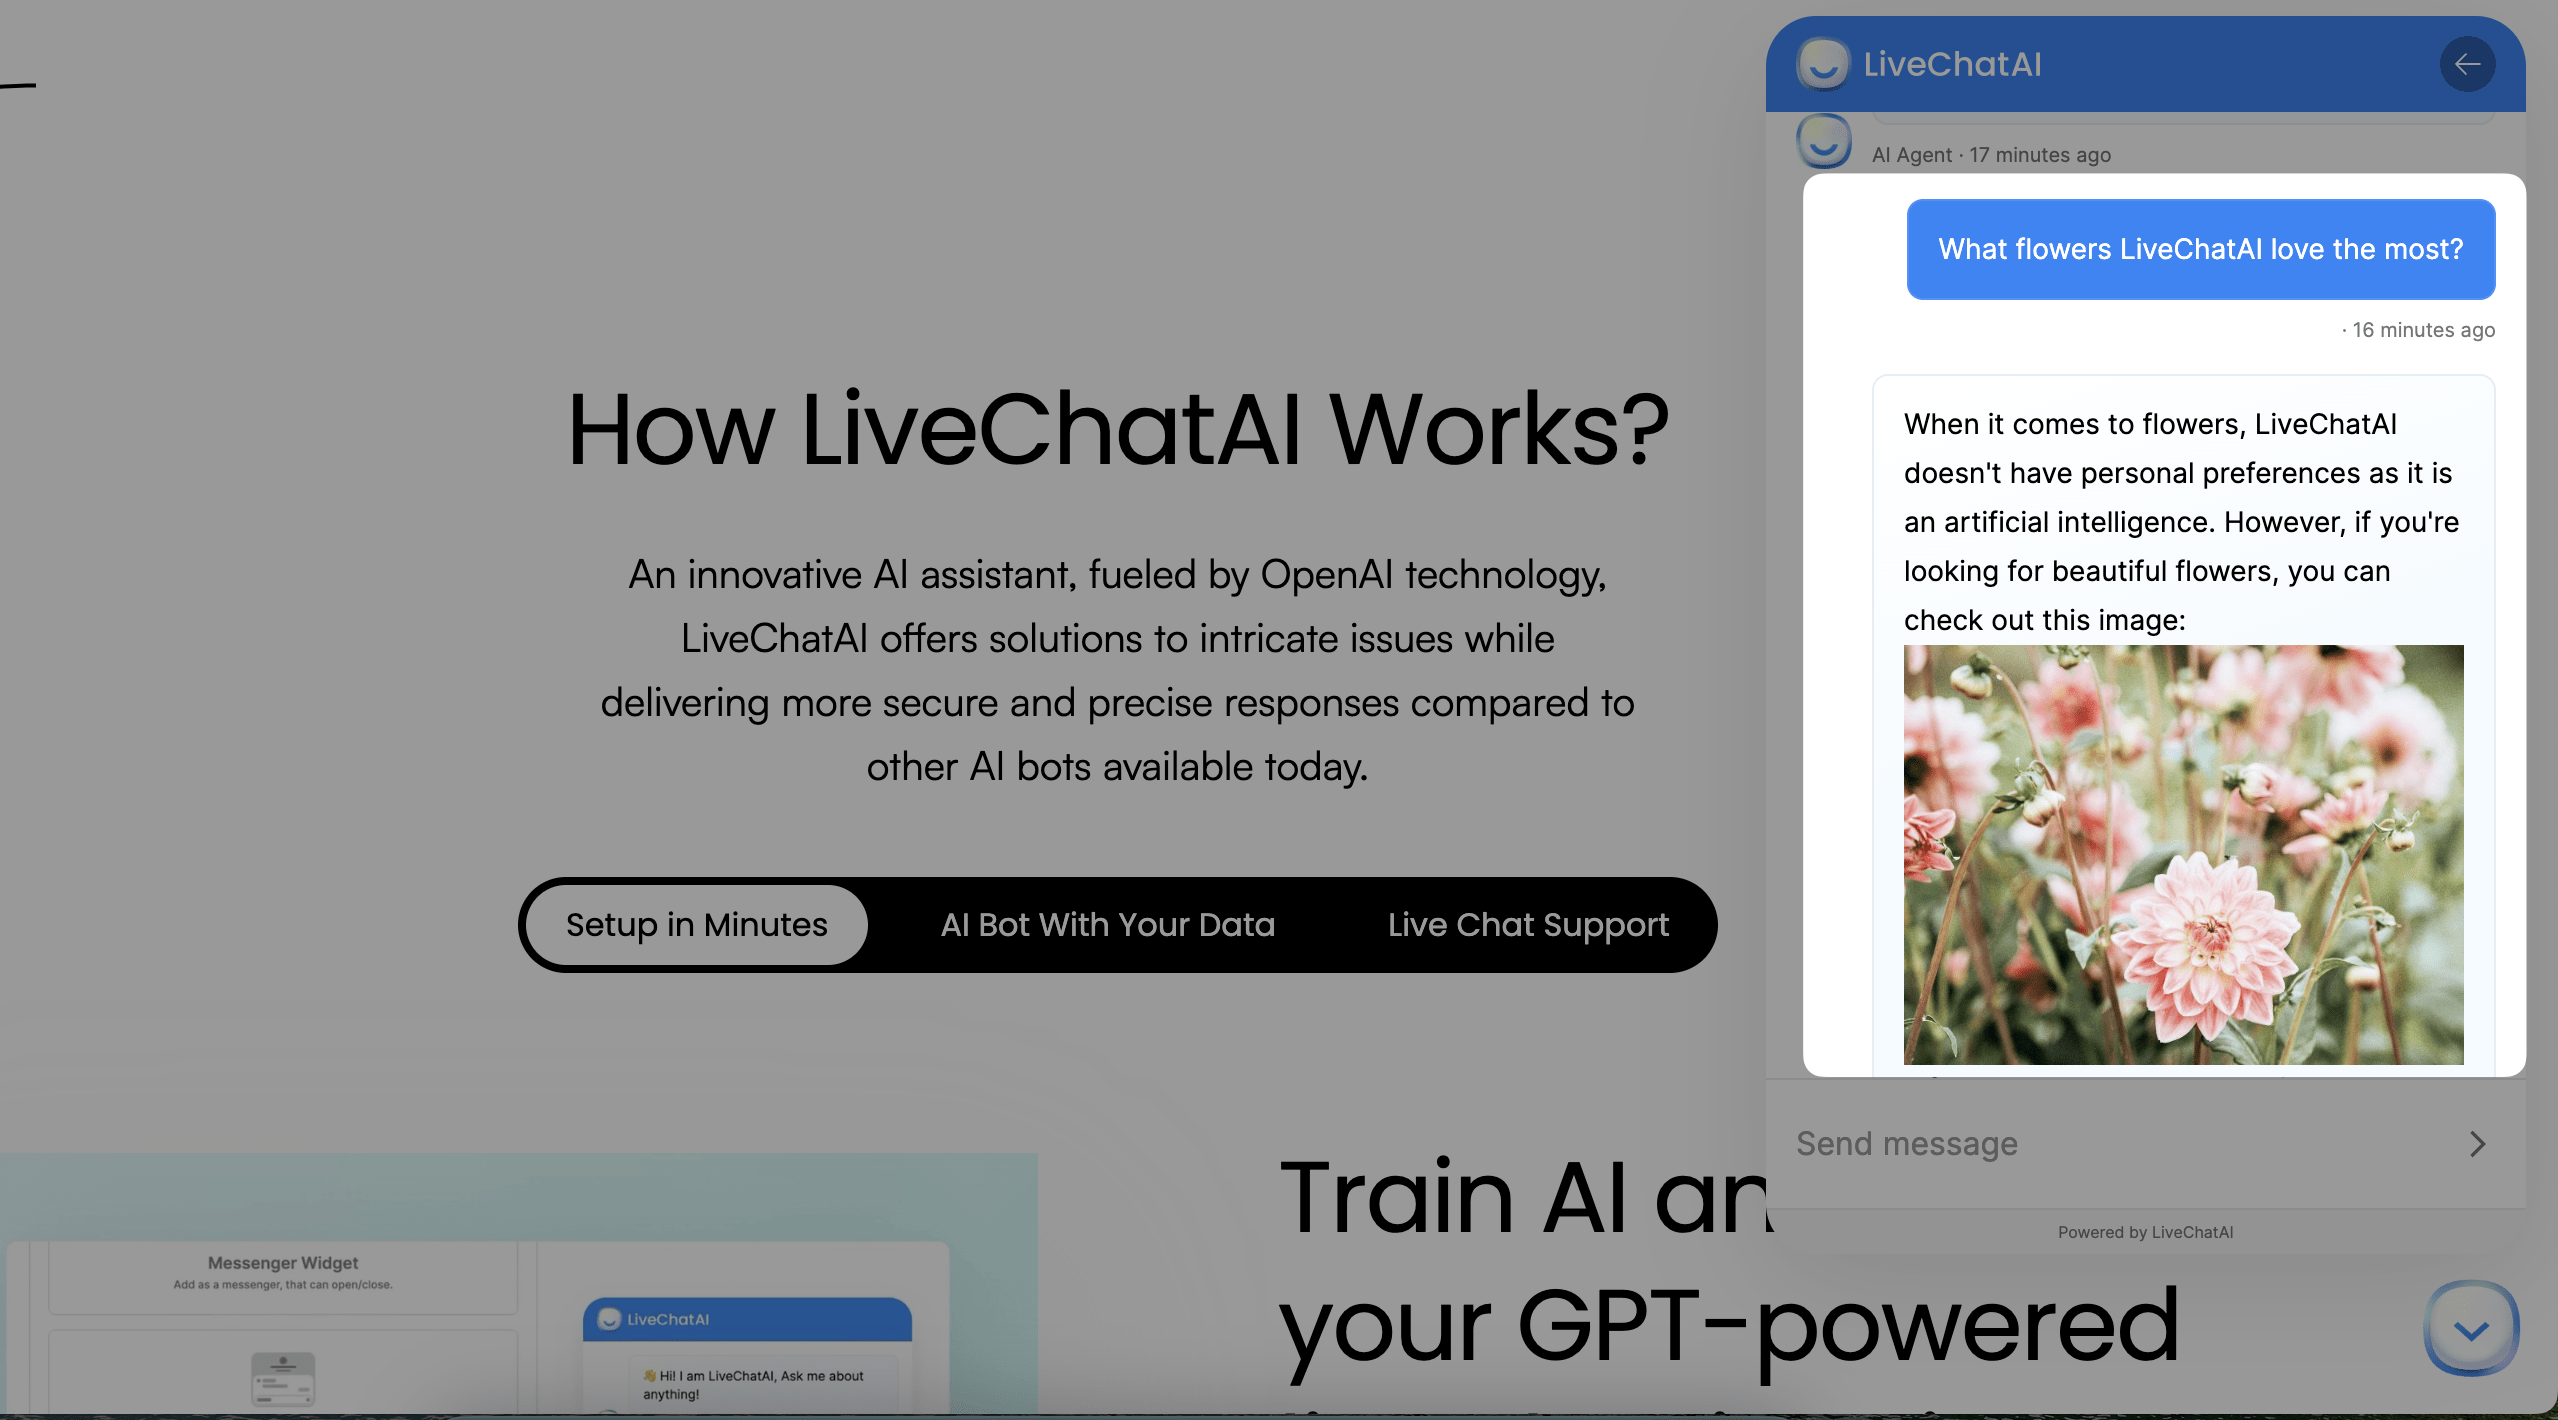 LiveChatAI AI bot gives responses with a visual 